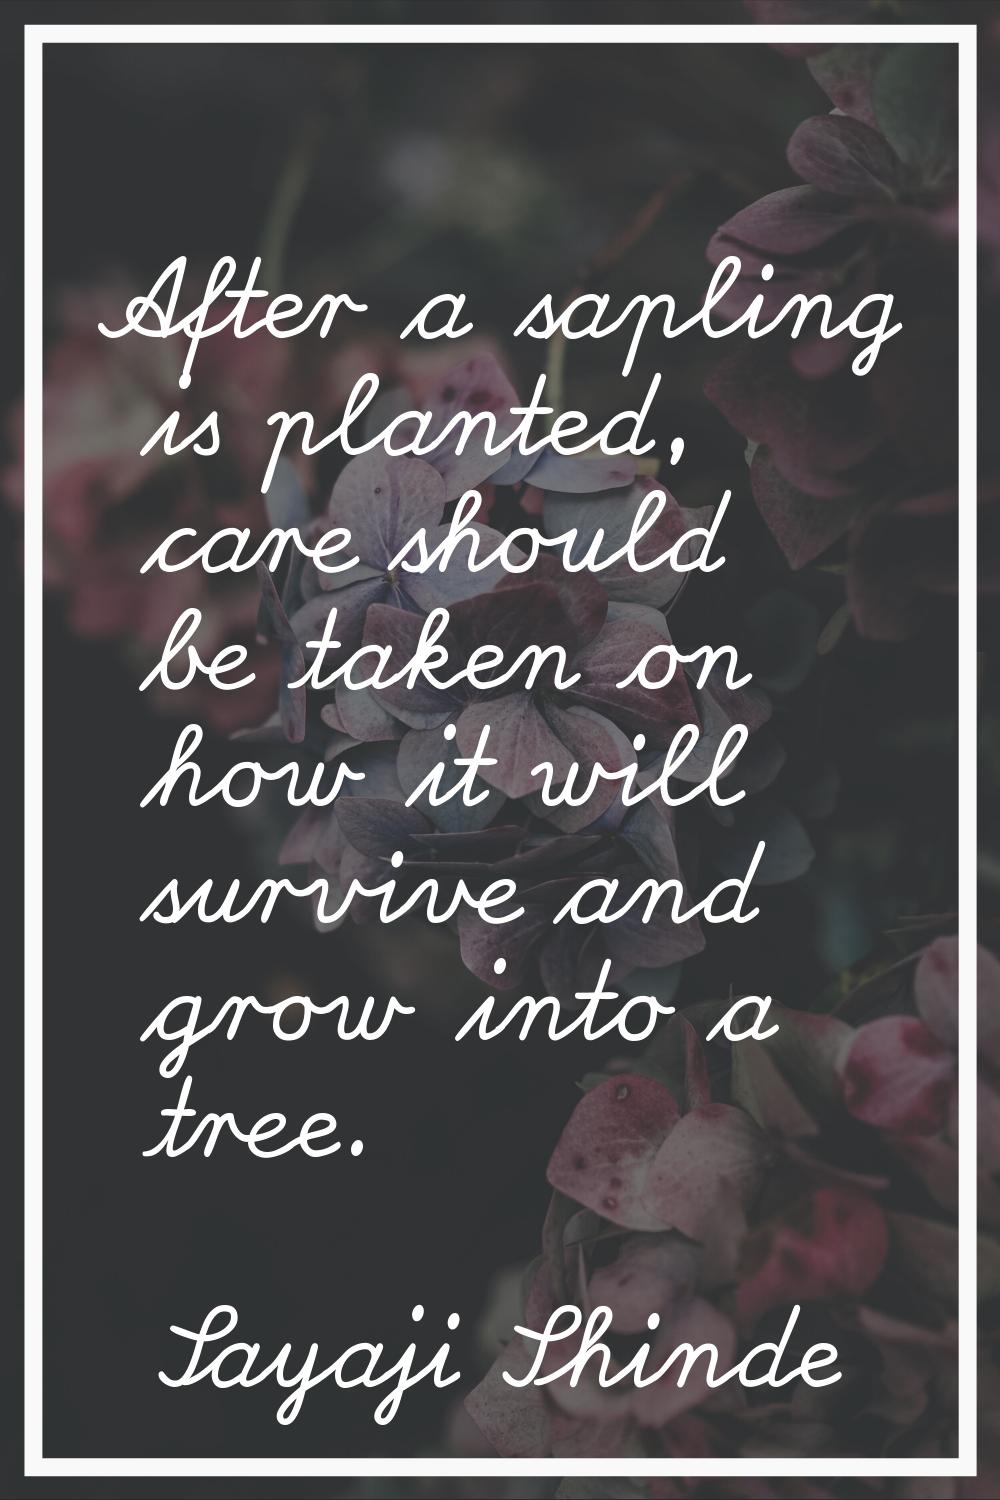 After a sapling is planted, care should be taken on how it will survive and grow into a tree.